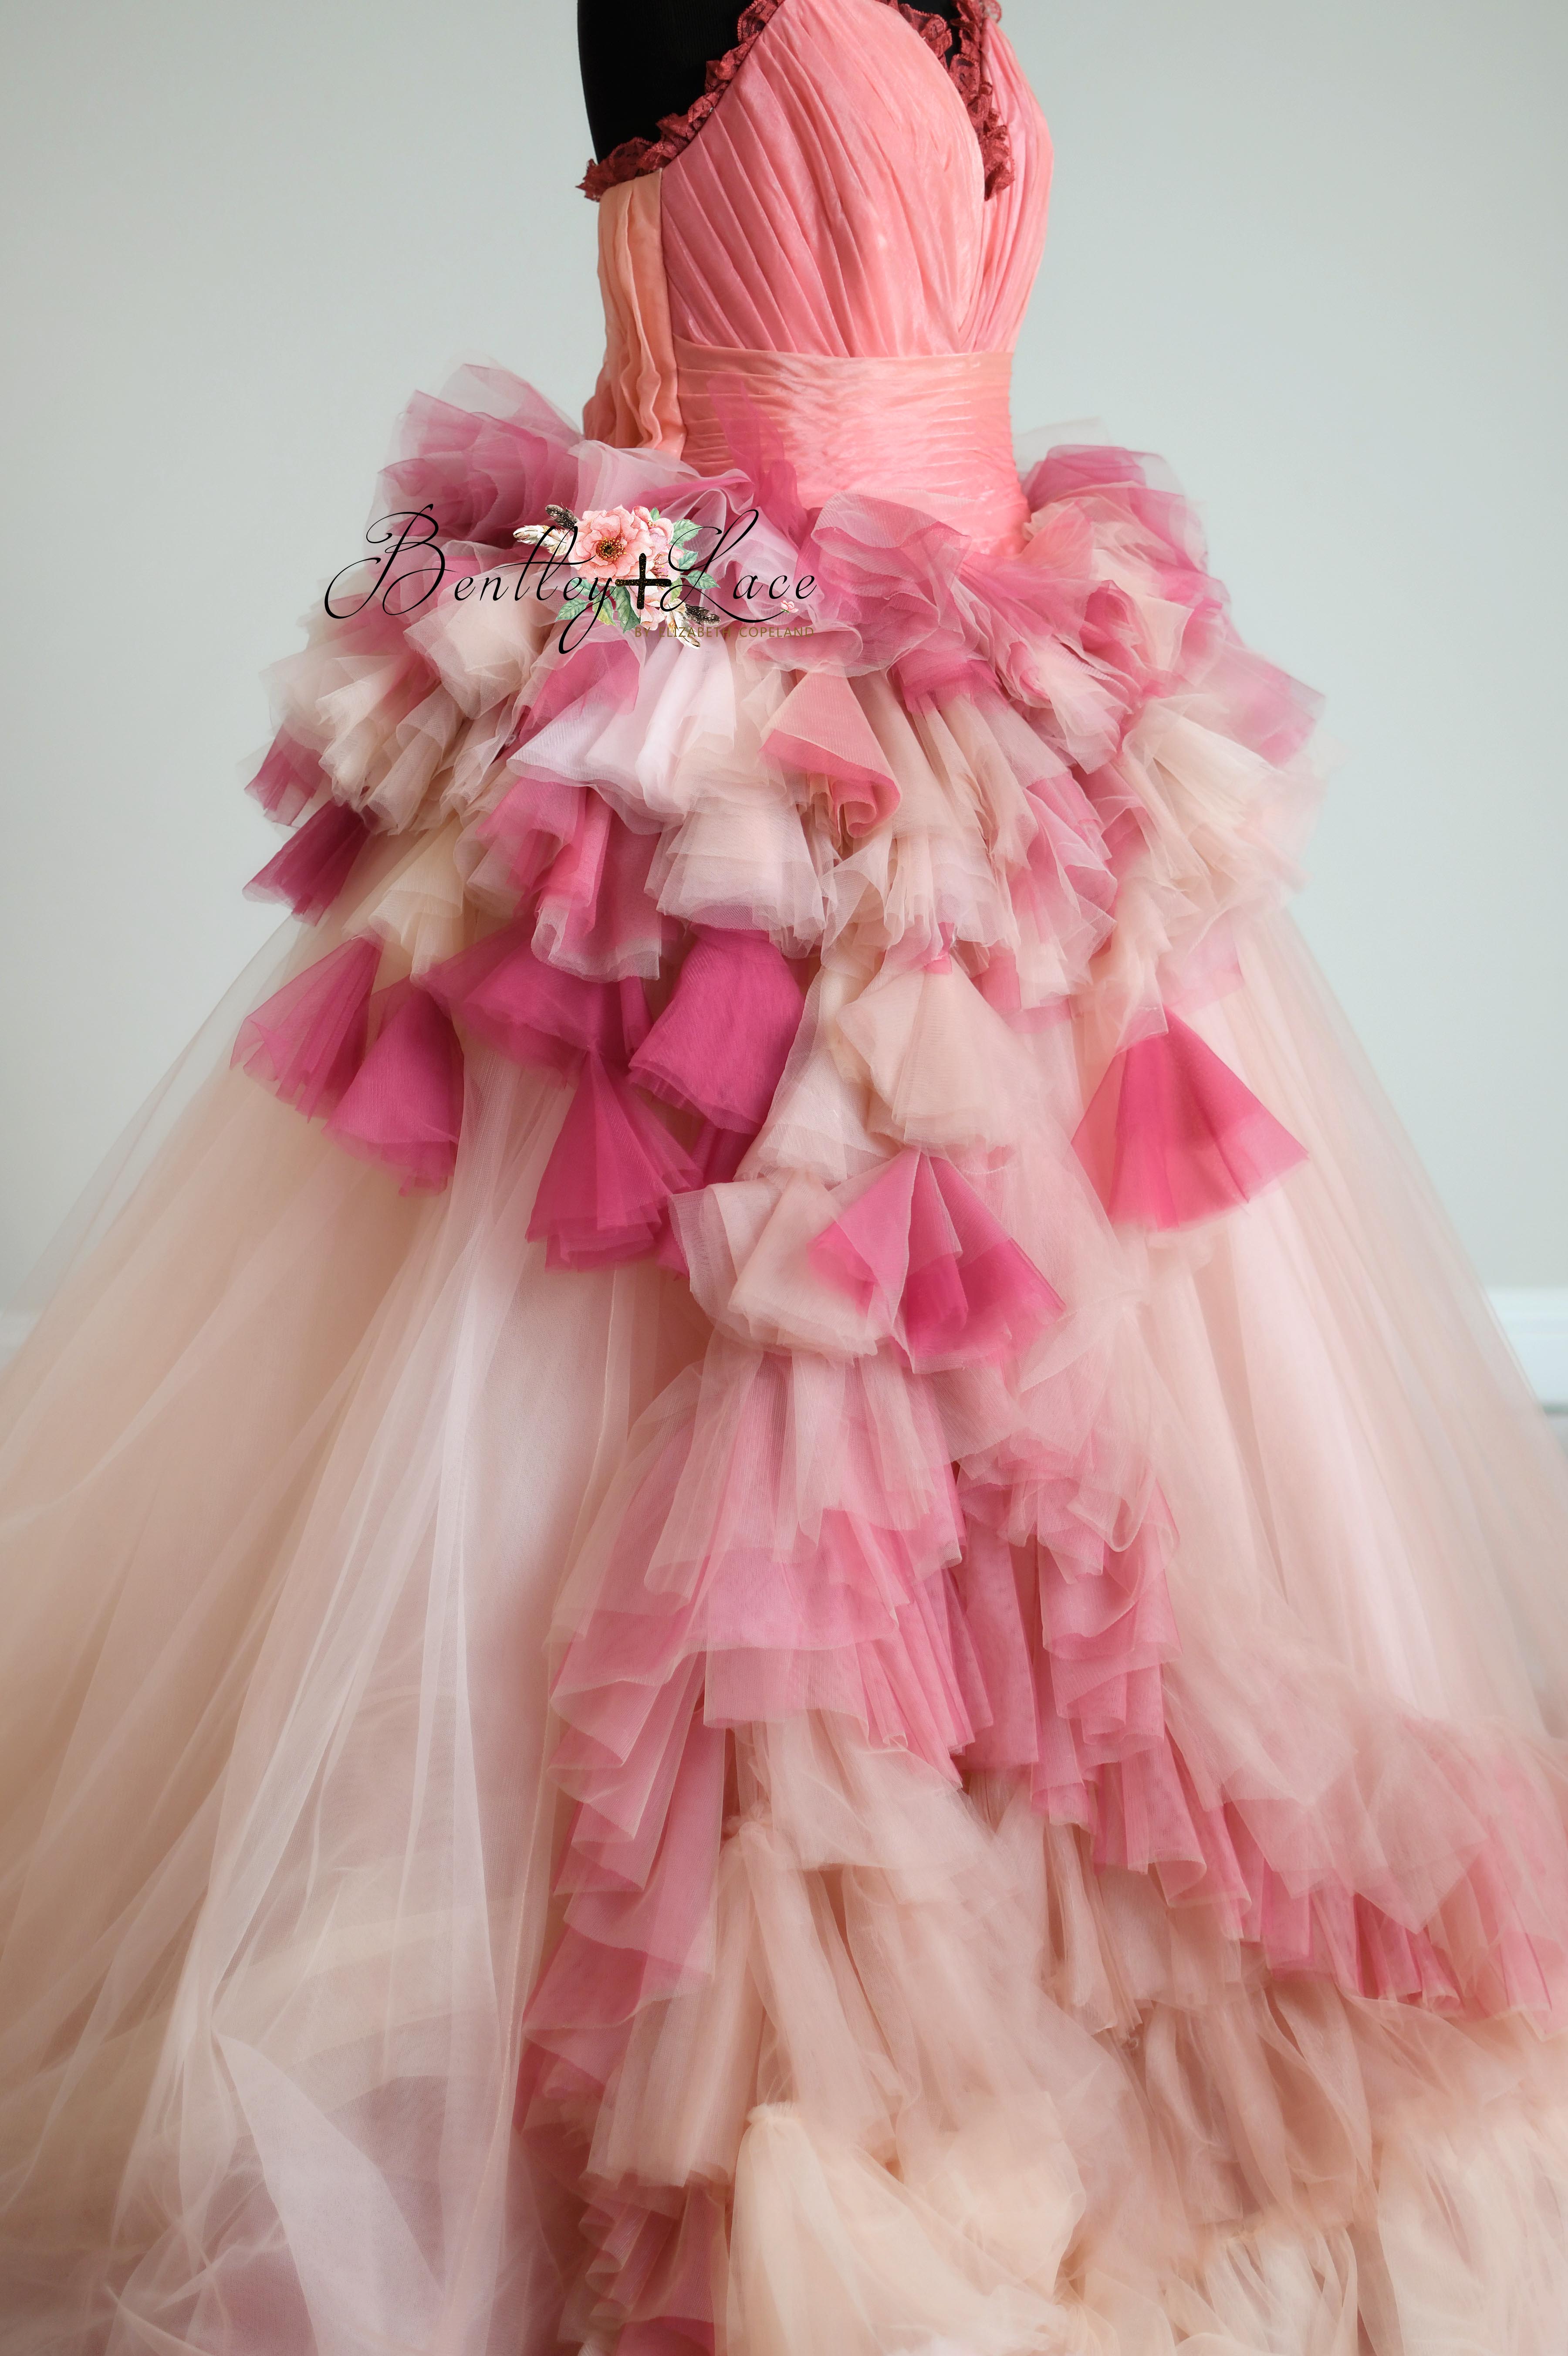 BLUSH BLOSSOM - FLOOR LONG COUTURE  GOWN  Editorial Dress, Couture Gown, Special Occasion Dress